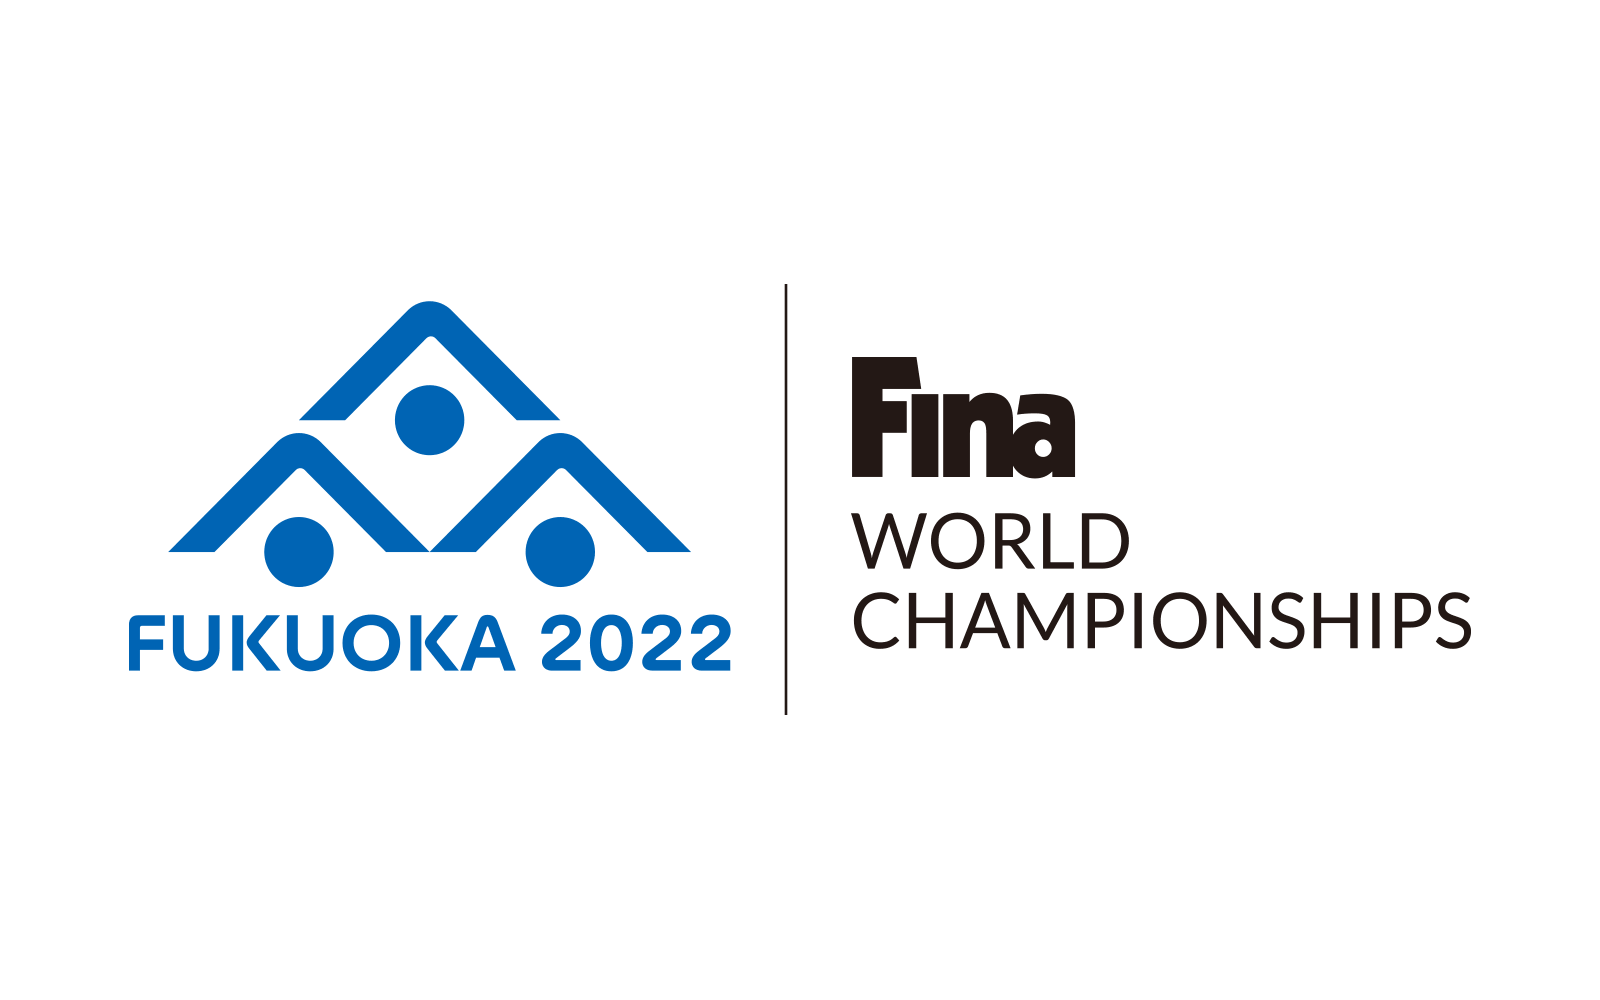 The International Swimming Federation has confirmed new dates for the rescheduled World Aquatics Championships ©FINA